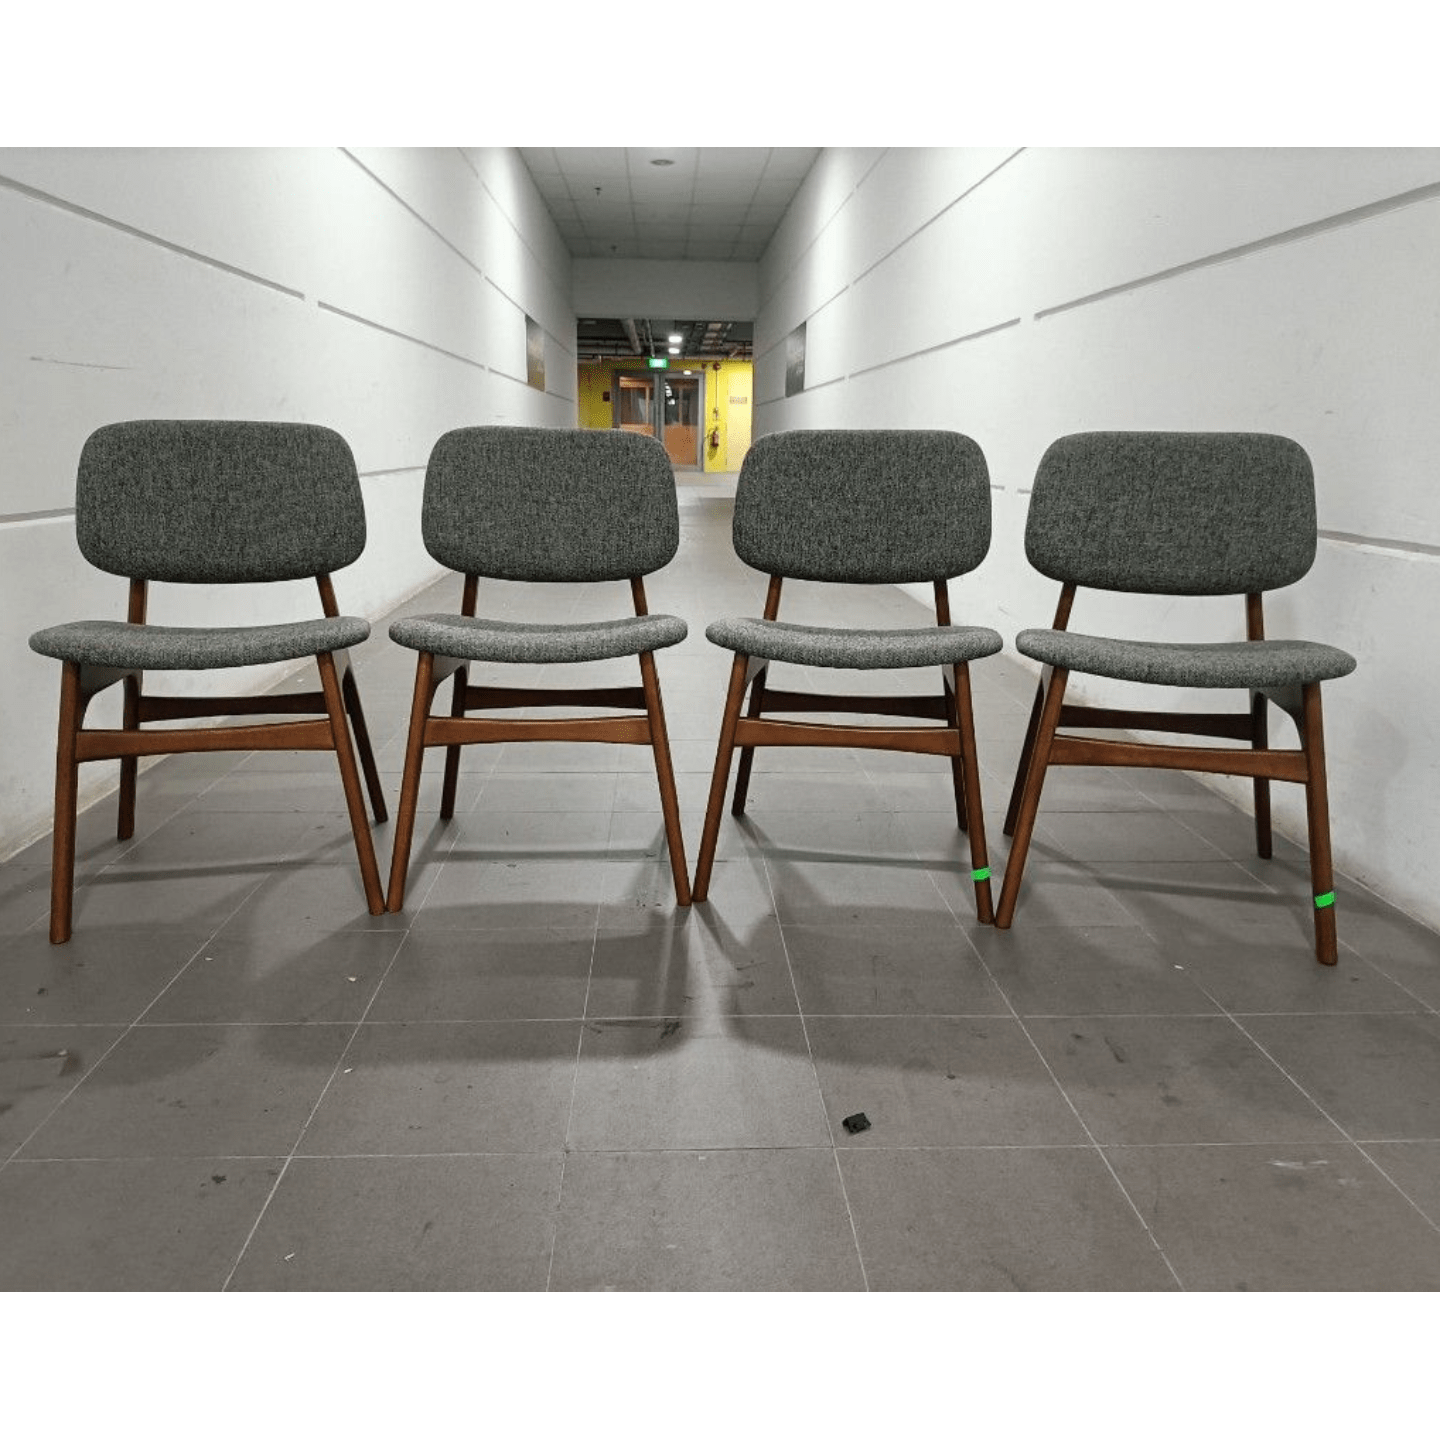 4 x BASSET Wooden Dining Chairs in CHARCOAL GREY FABRIC